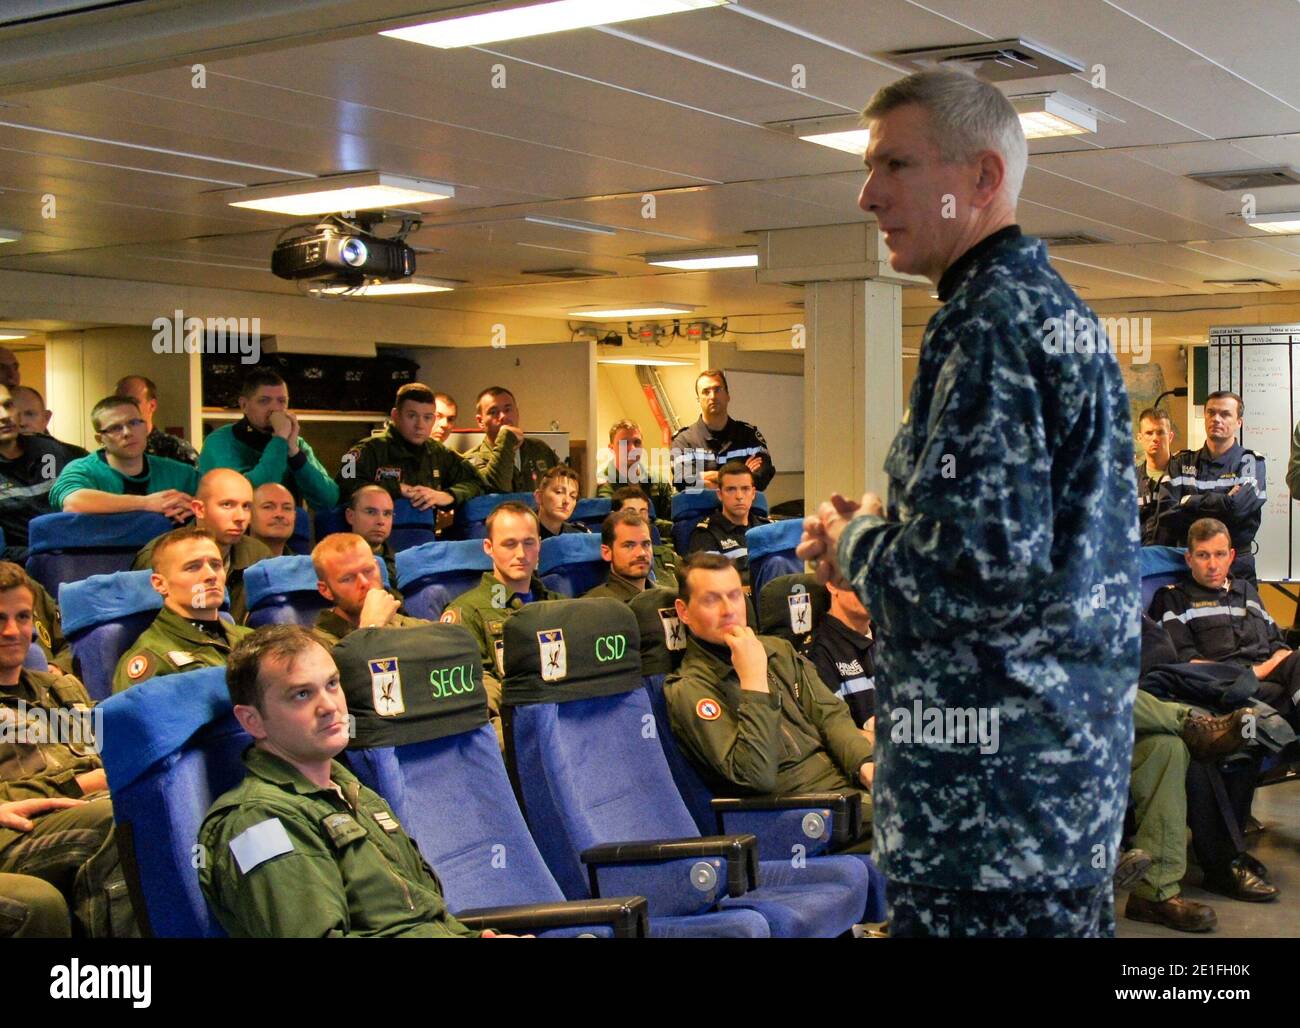 Adm. Samuel J. Locklear, III, commander, Joint Task Force Odyssey Dawn, speaks with an aircrew team from the French Navy aircraft carrier Charles de Gaulle (R91). Charles de Gaulle is operating in the Mediterranean Sea supporting the coalition led operations in response to the crisis in Libya. Joint Task Force Odyssey Dawn is the U.S. Africa Command task force established to provide operational and tactical command and control of U.S. military forces supporting the international response to the unrest in Libya and enforcement of United Nations Security Council Resolution (UNSCR) 1973. UNSCR 19 Stock Photo